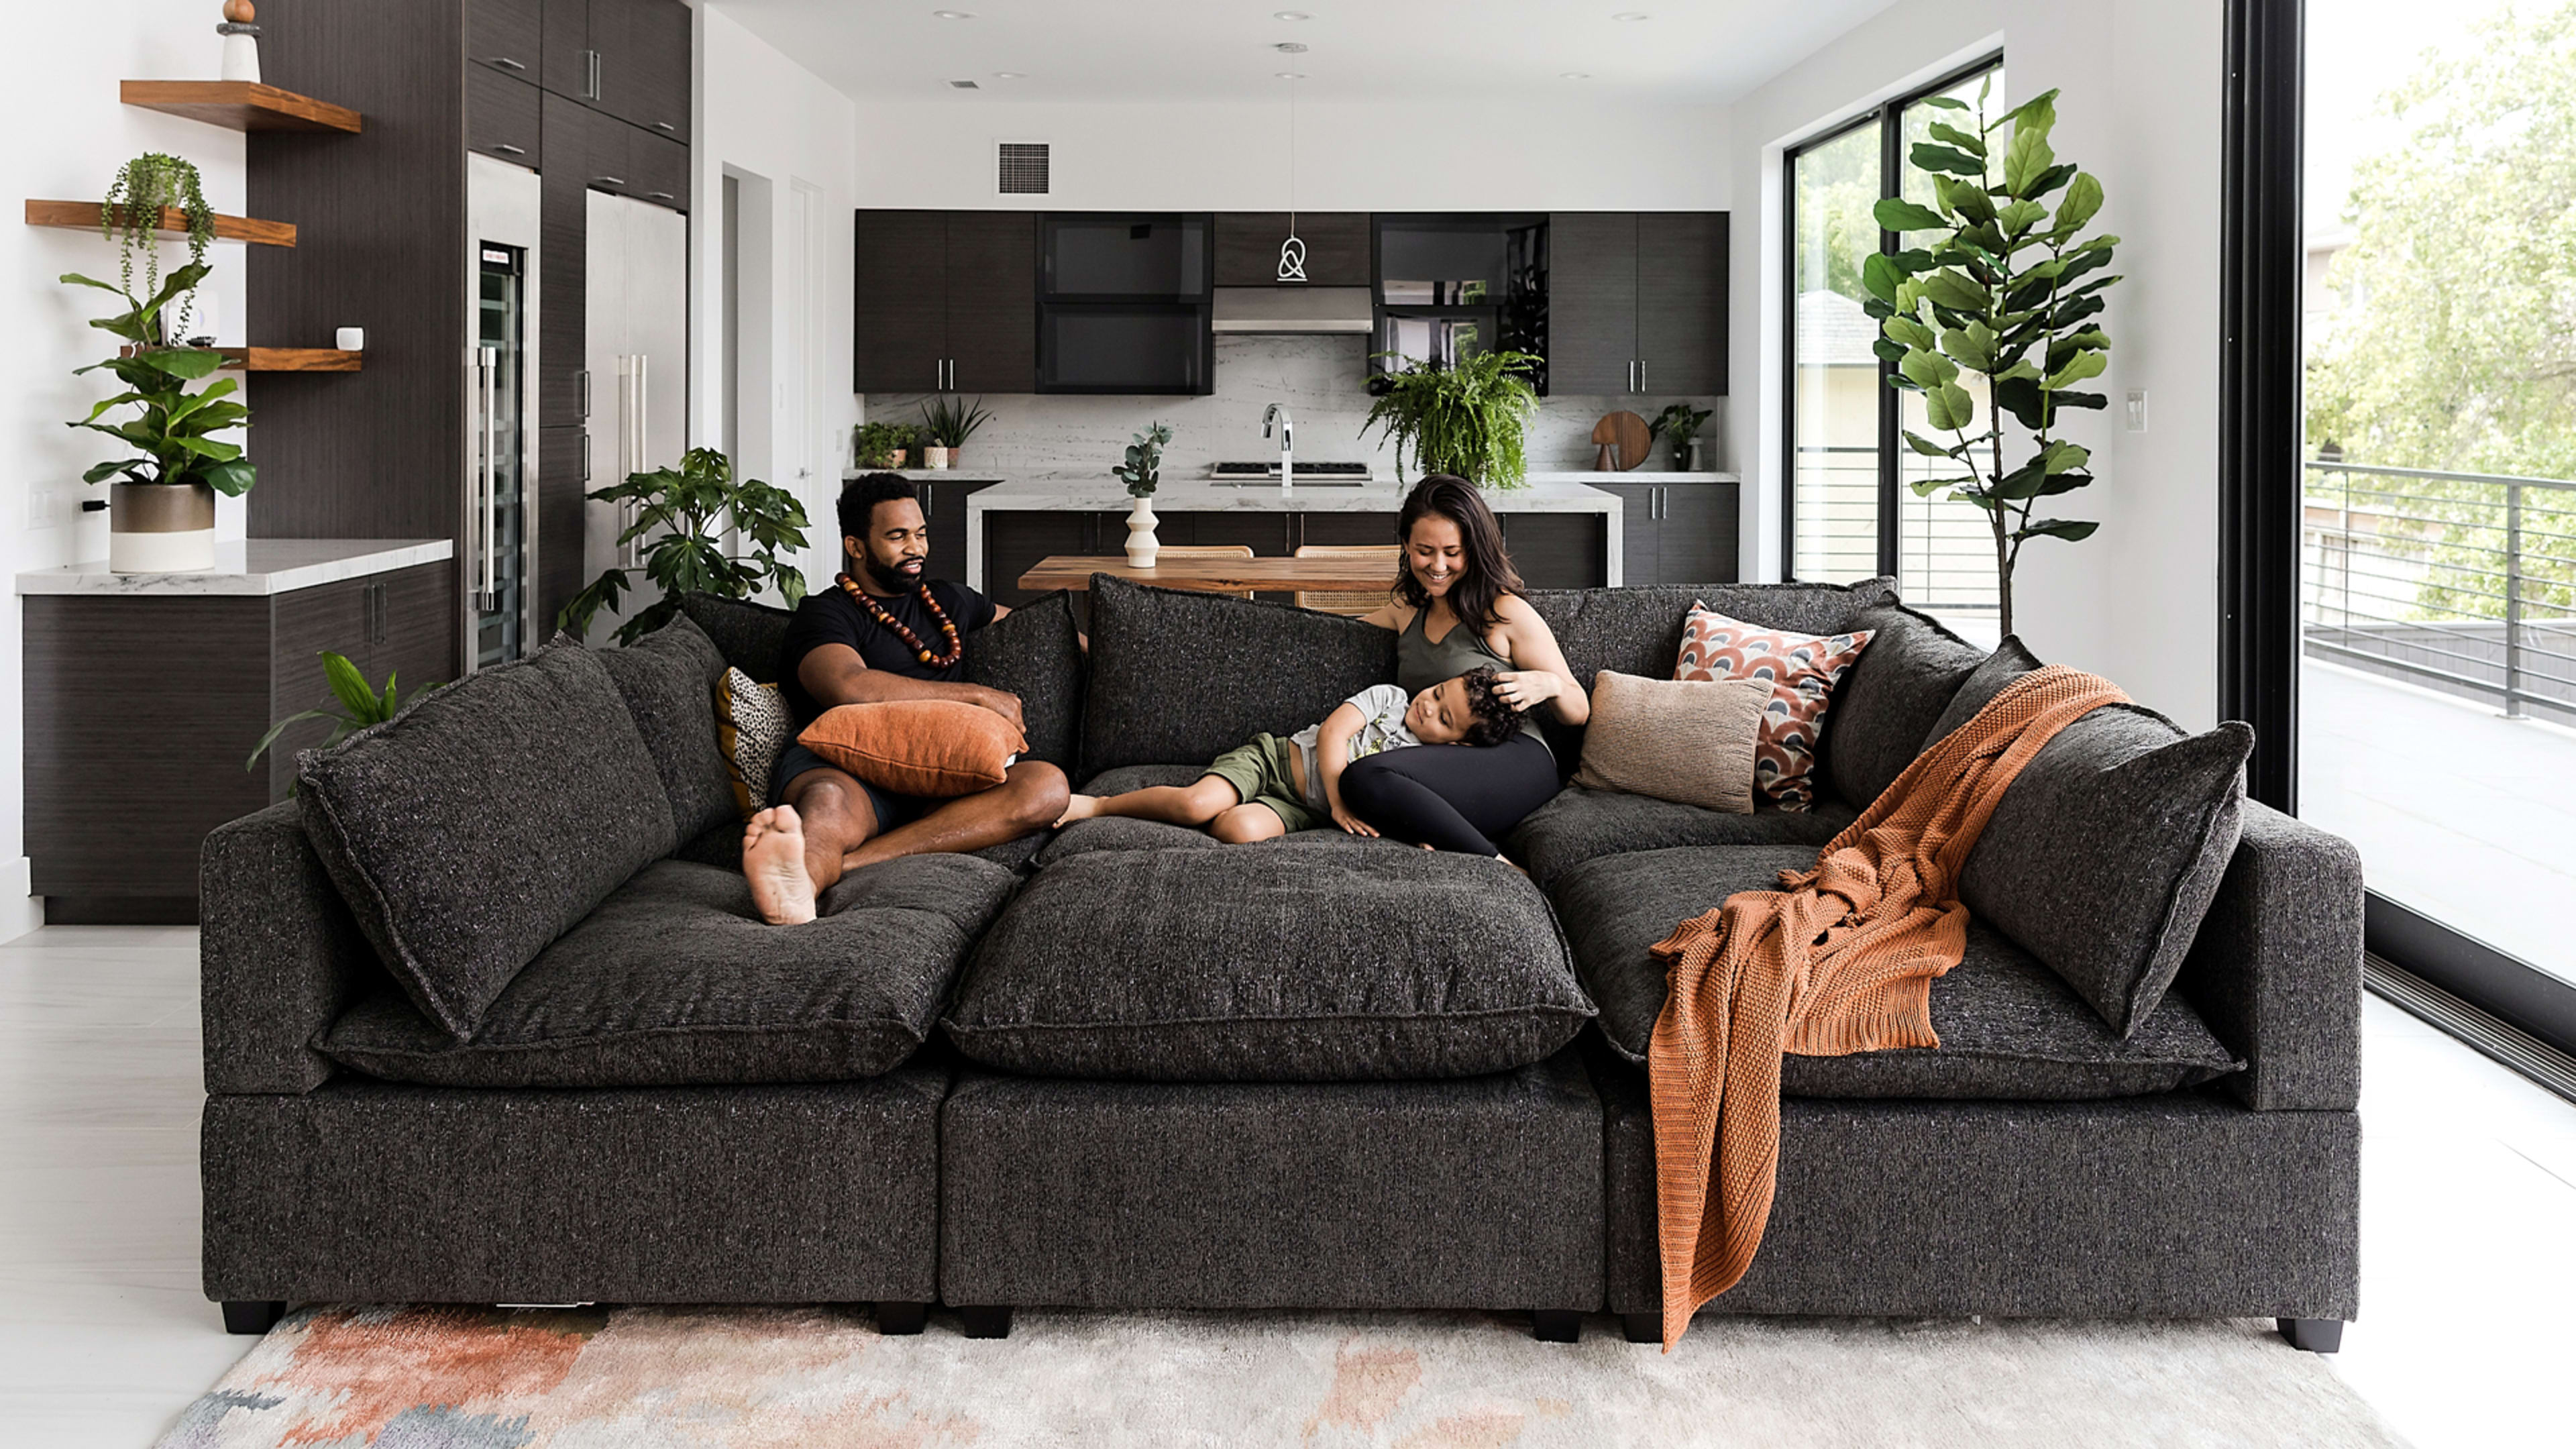 Dreaming of a Cloud couch? Albany Park’s modular, easy-to-assemble couches are luxurious and reasonably priced.